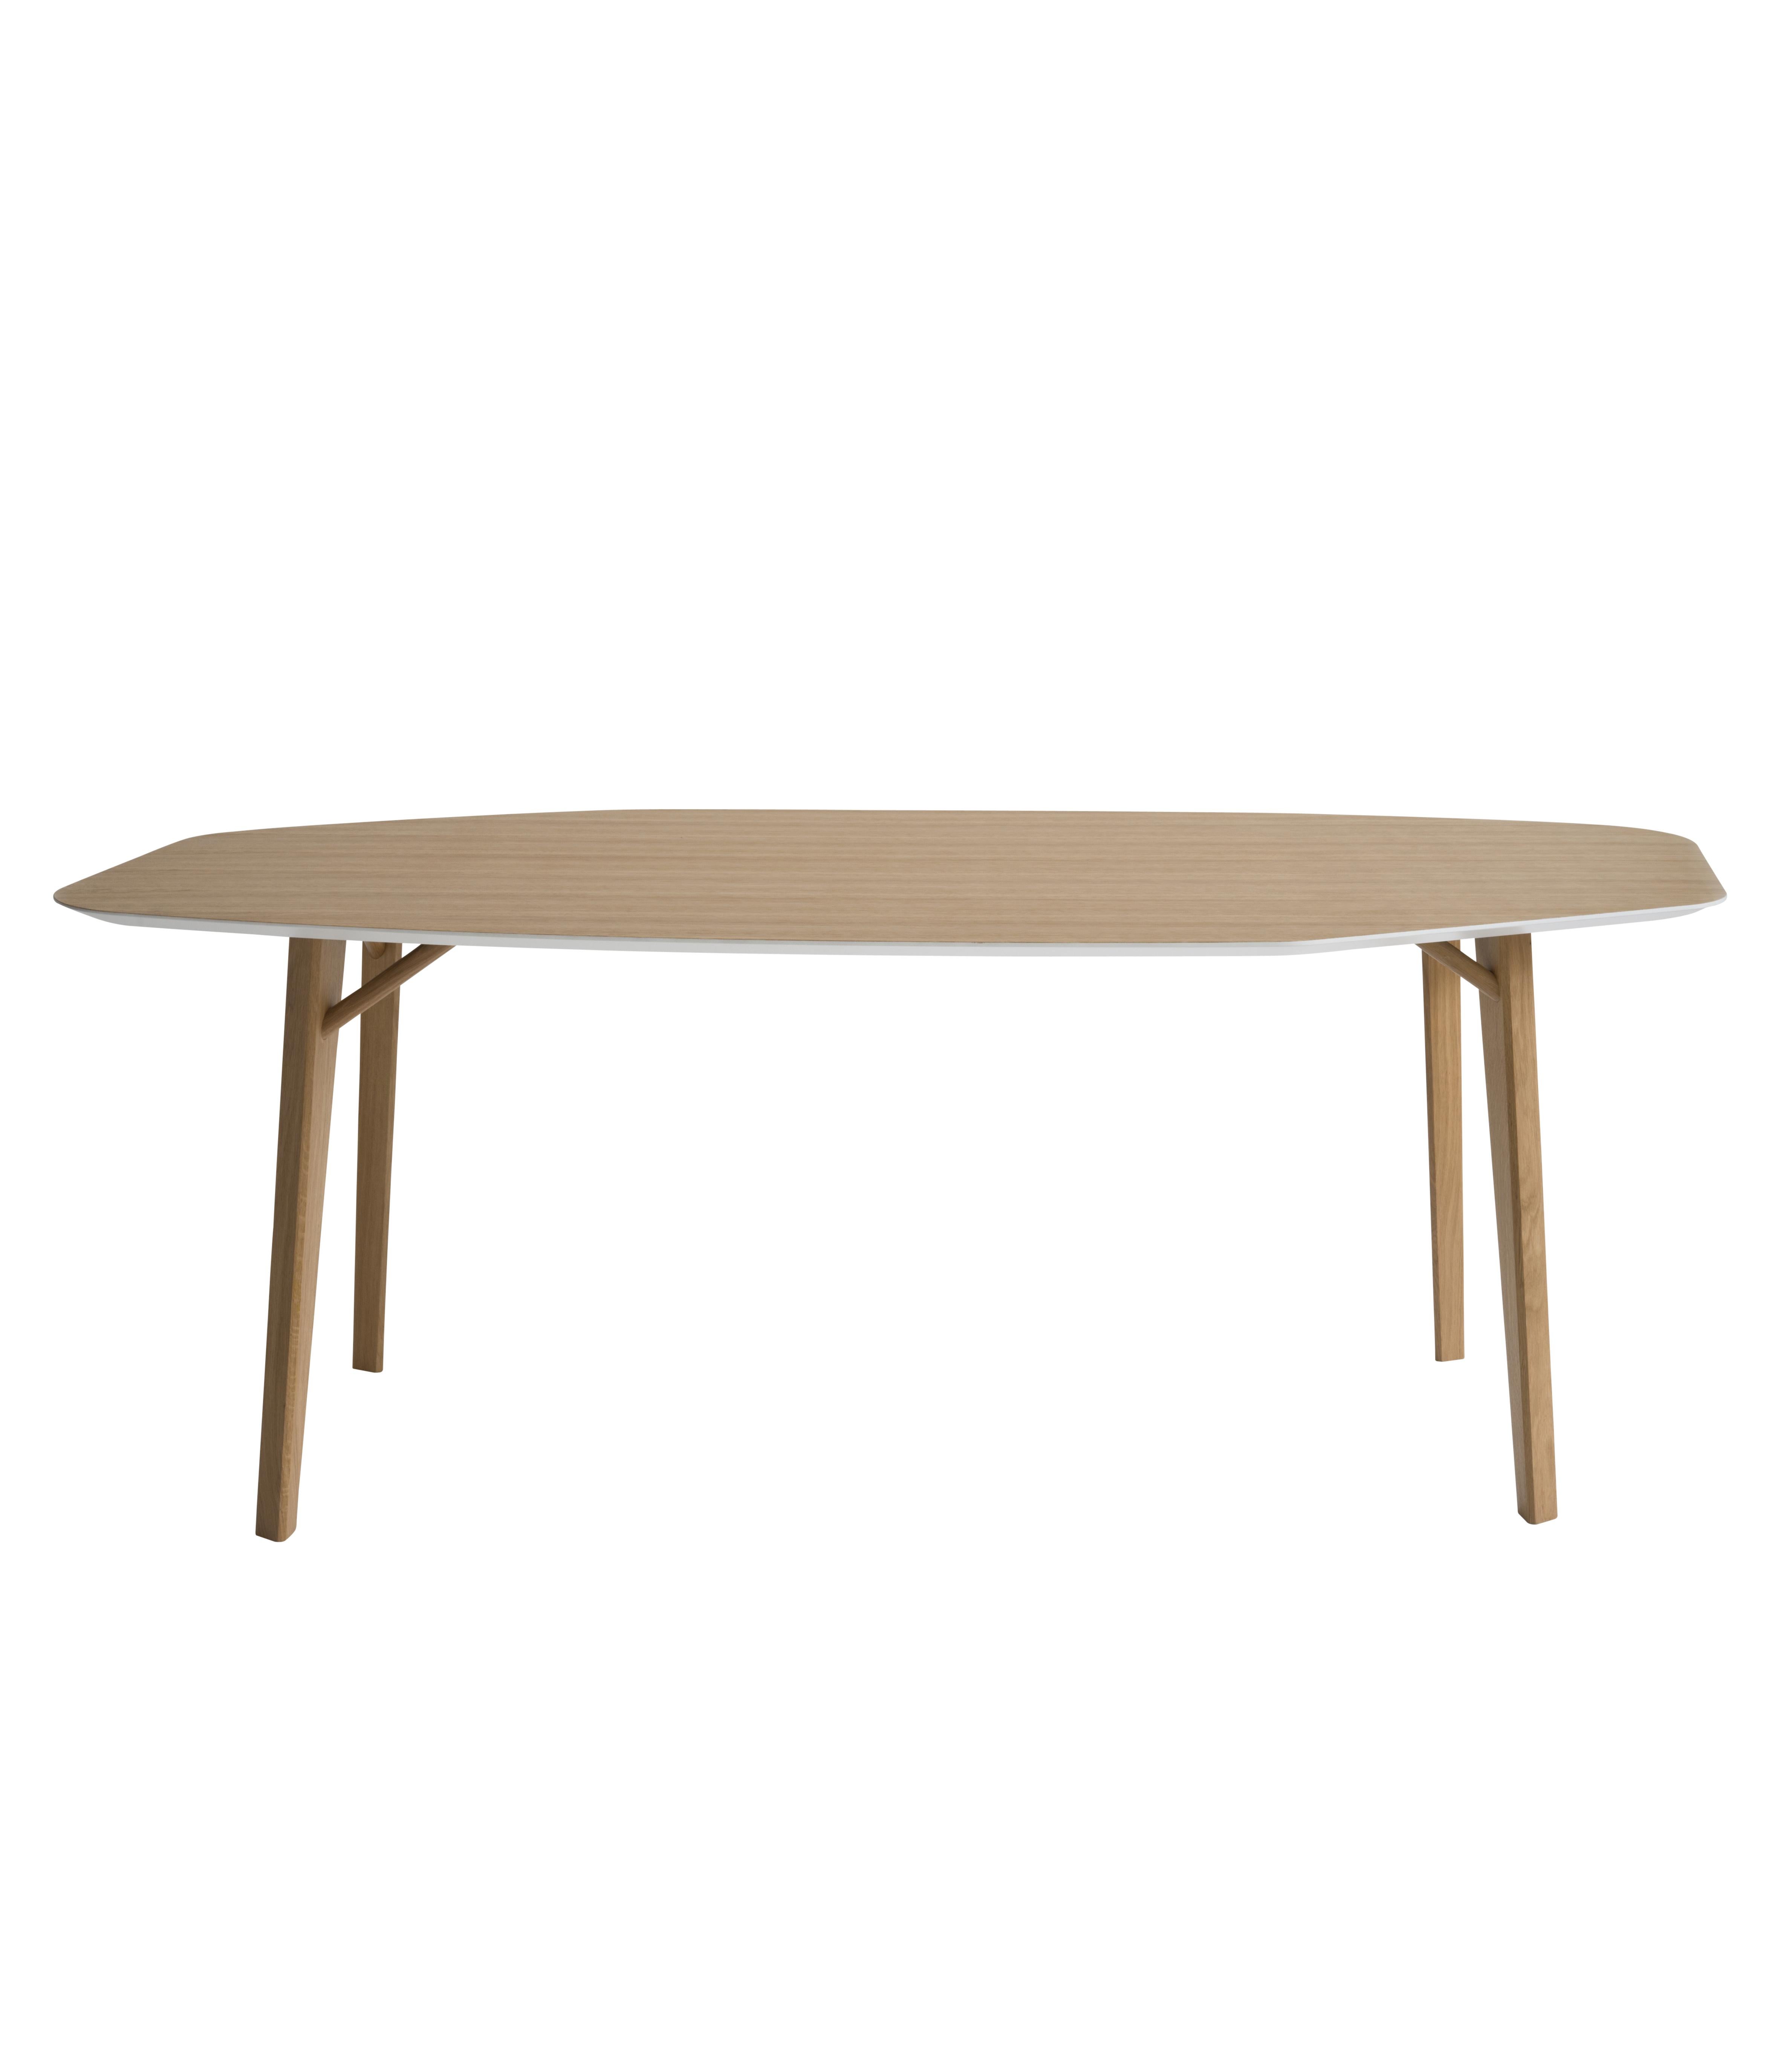 Tria Octa Table by Colé Italia with Lorenz + Kaz, 2012
Dimensions: H.75; Pentagonal top ø 140
Materials: Veneered, lacquered or ceramic top with rounded corners, accordingly lacquered on the back. 5 solid oak Legs. (Custom size top available upon